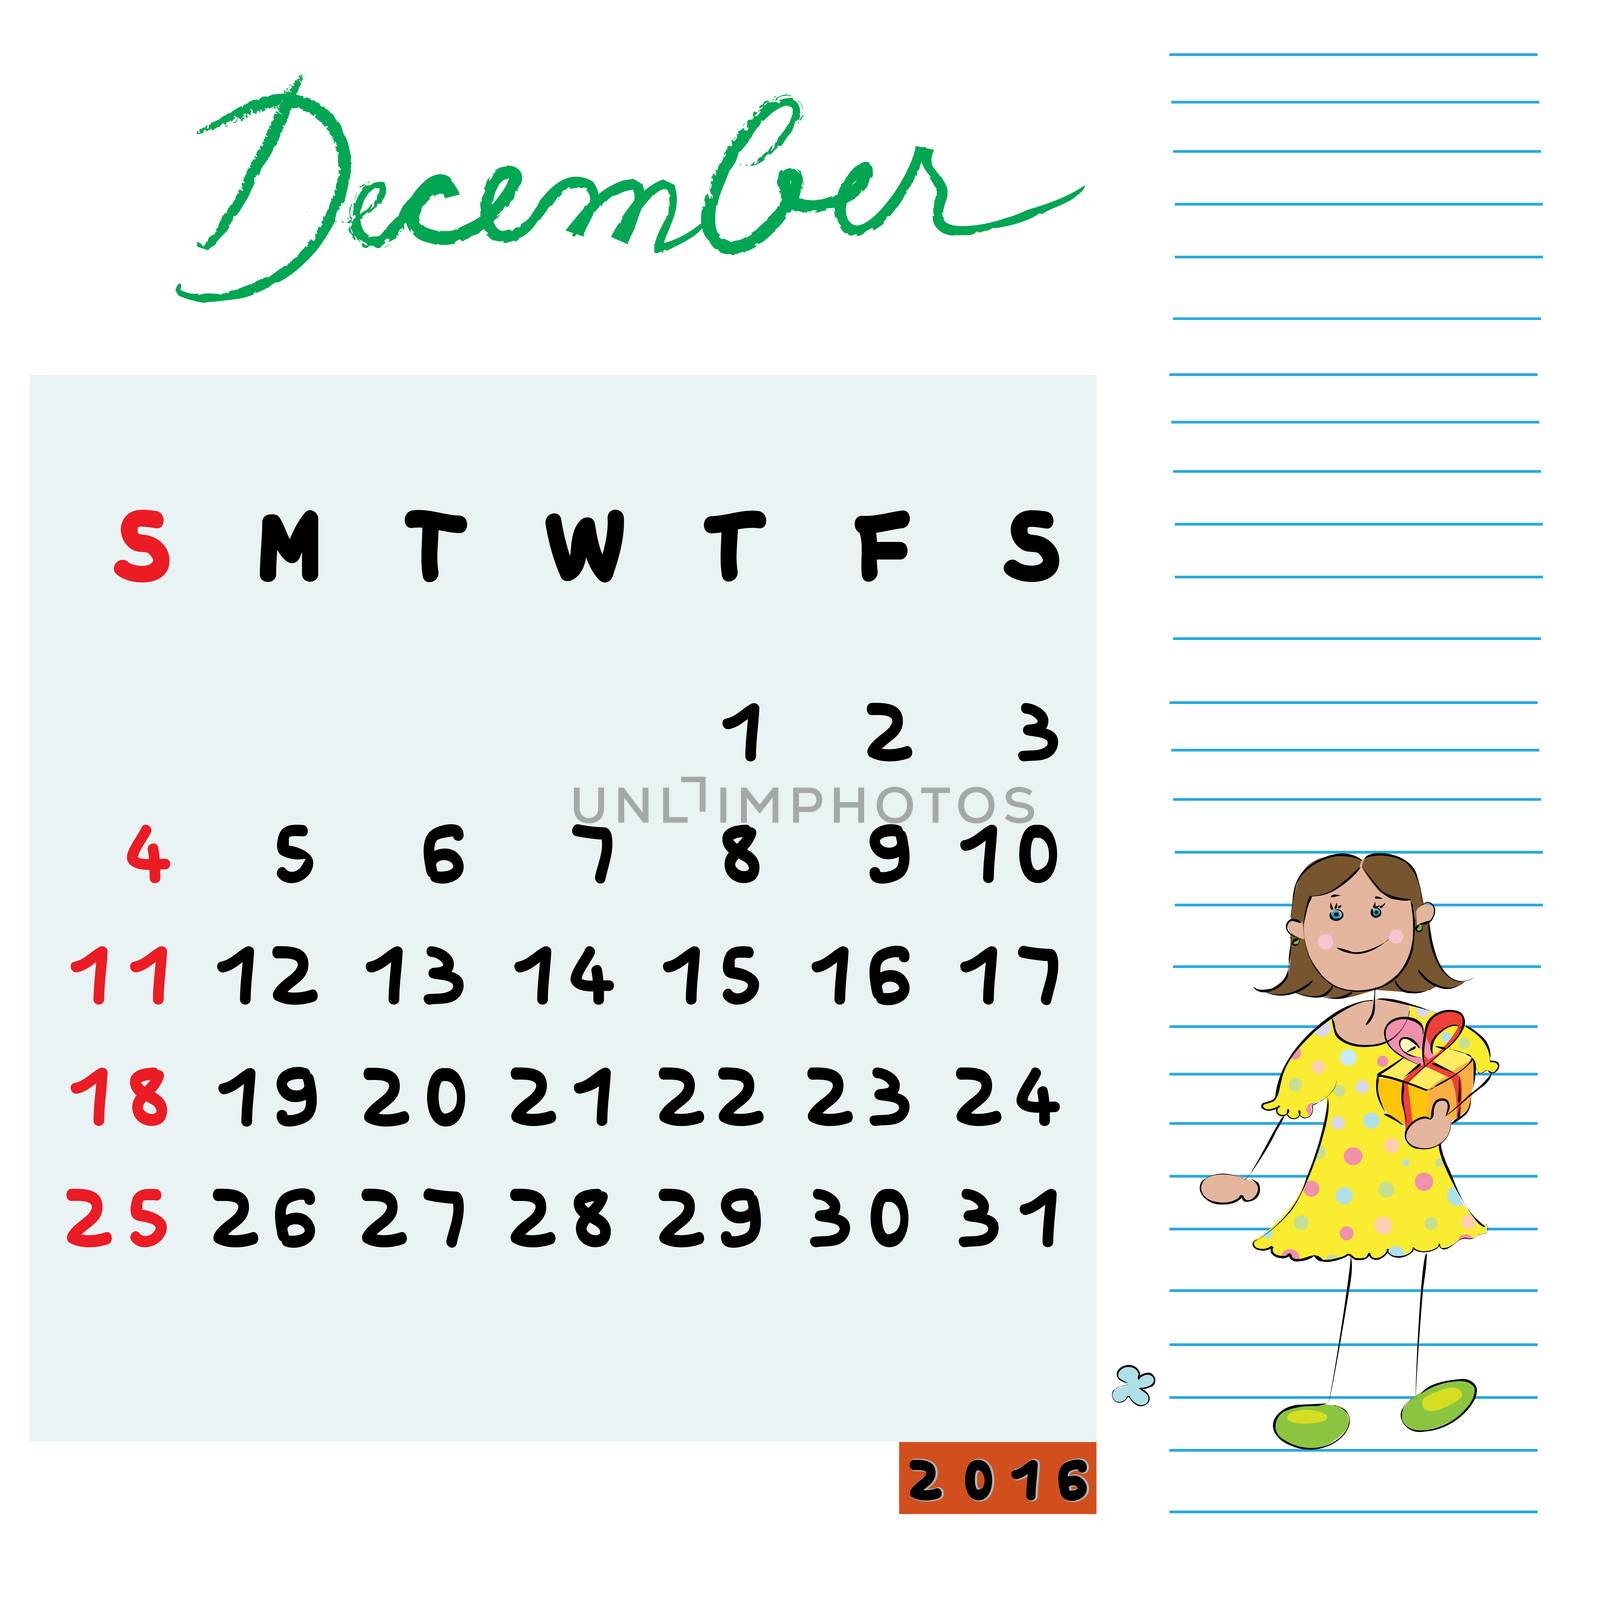 Hand drawn design of the December 2016 calendar with kid illustration, gifted student profile for schools